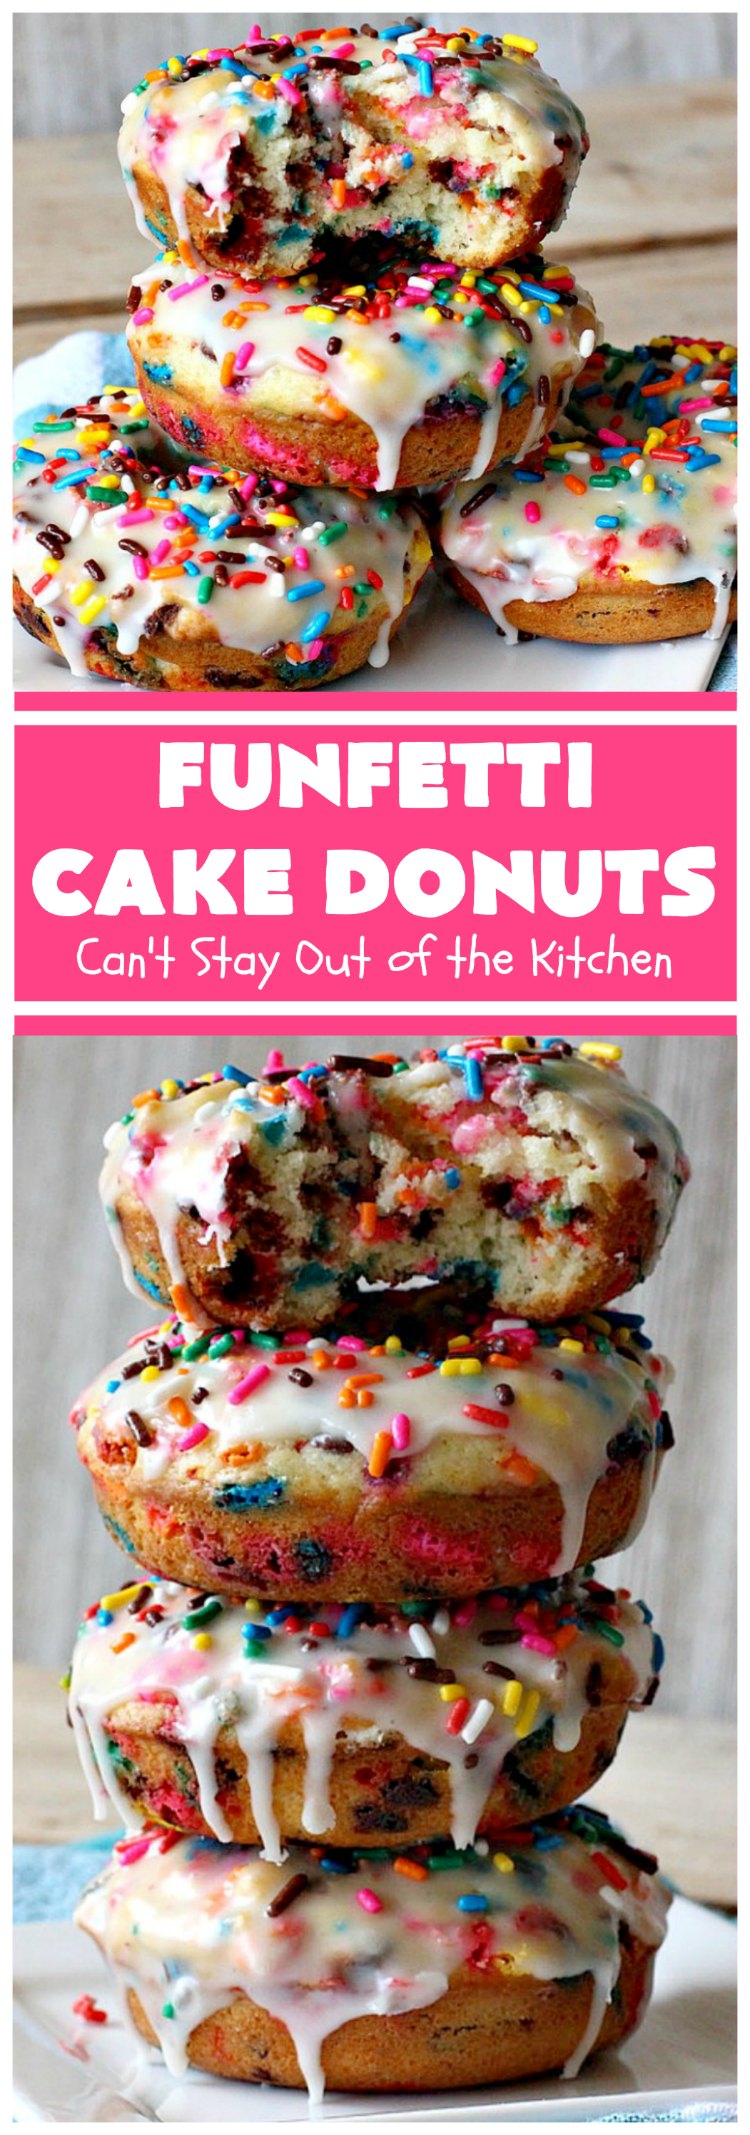 Funfetti Cake Donuts | Can't Stay Out of the Kitchen